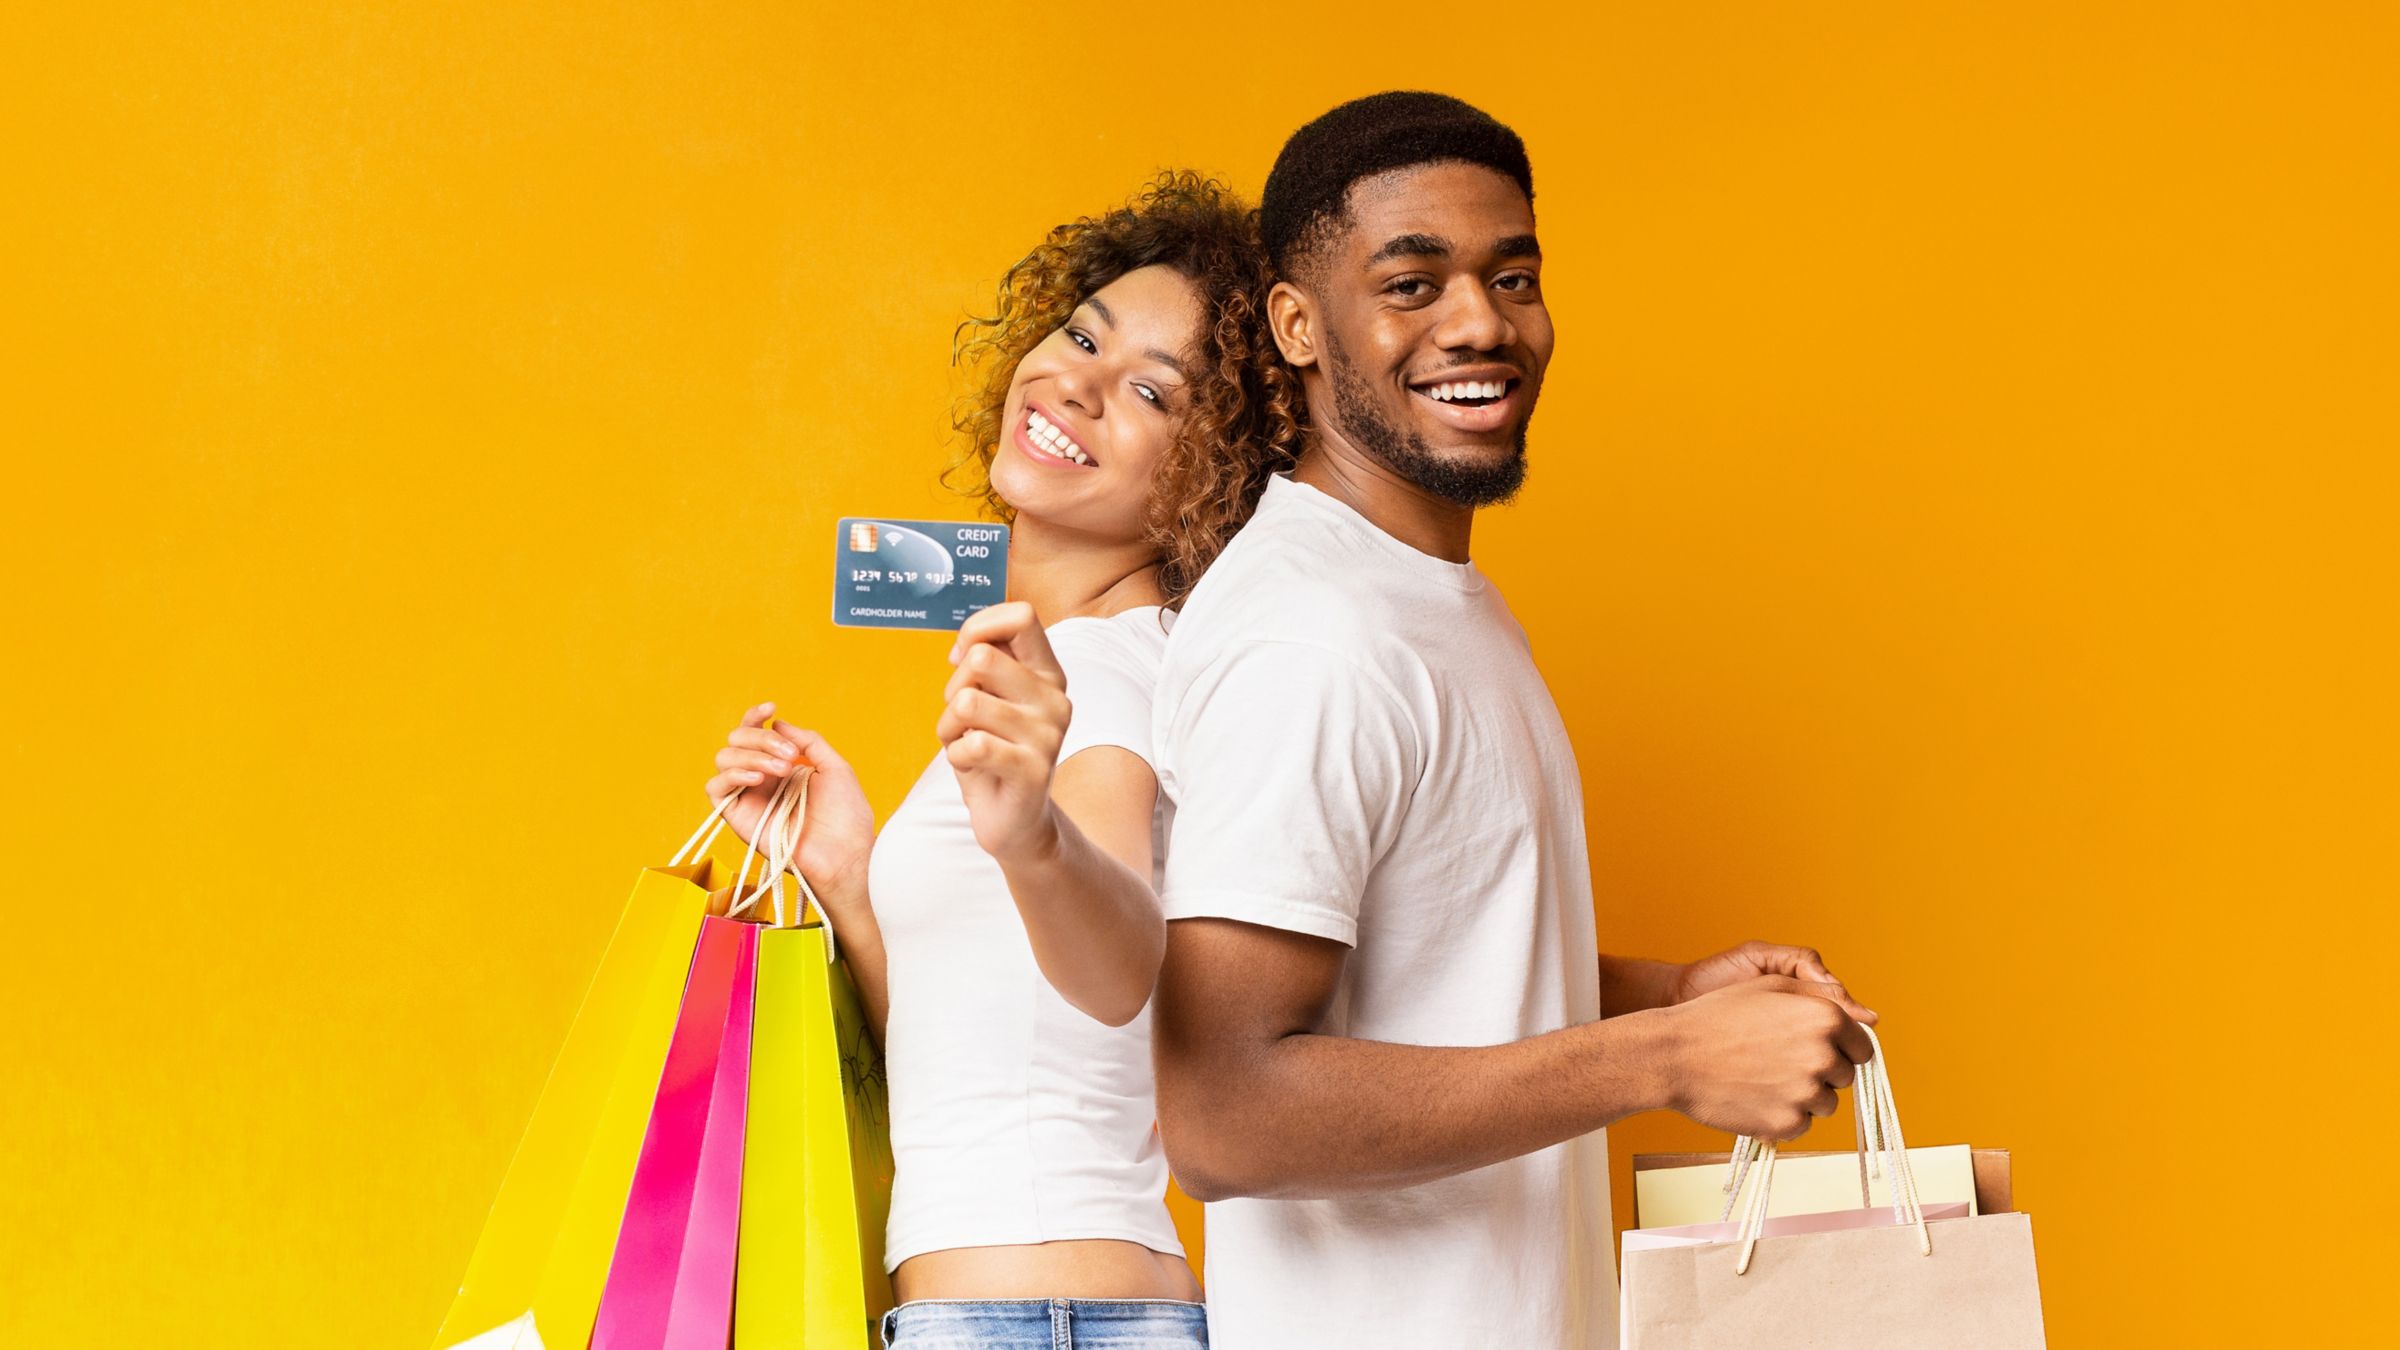 Couple smiling holding credit card and shopping bags